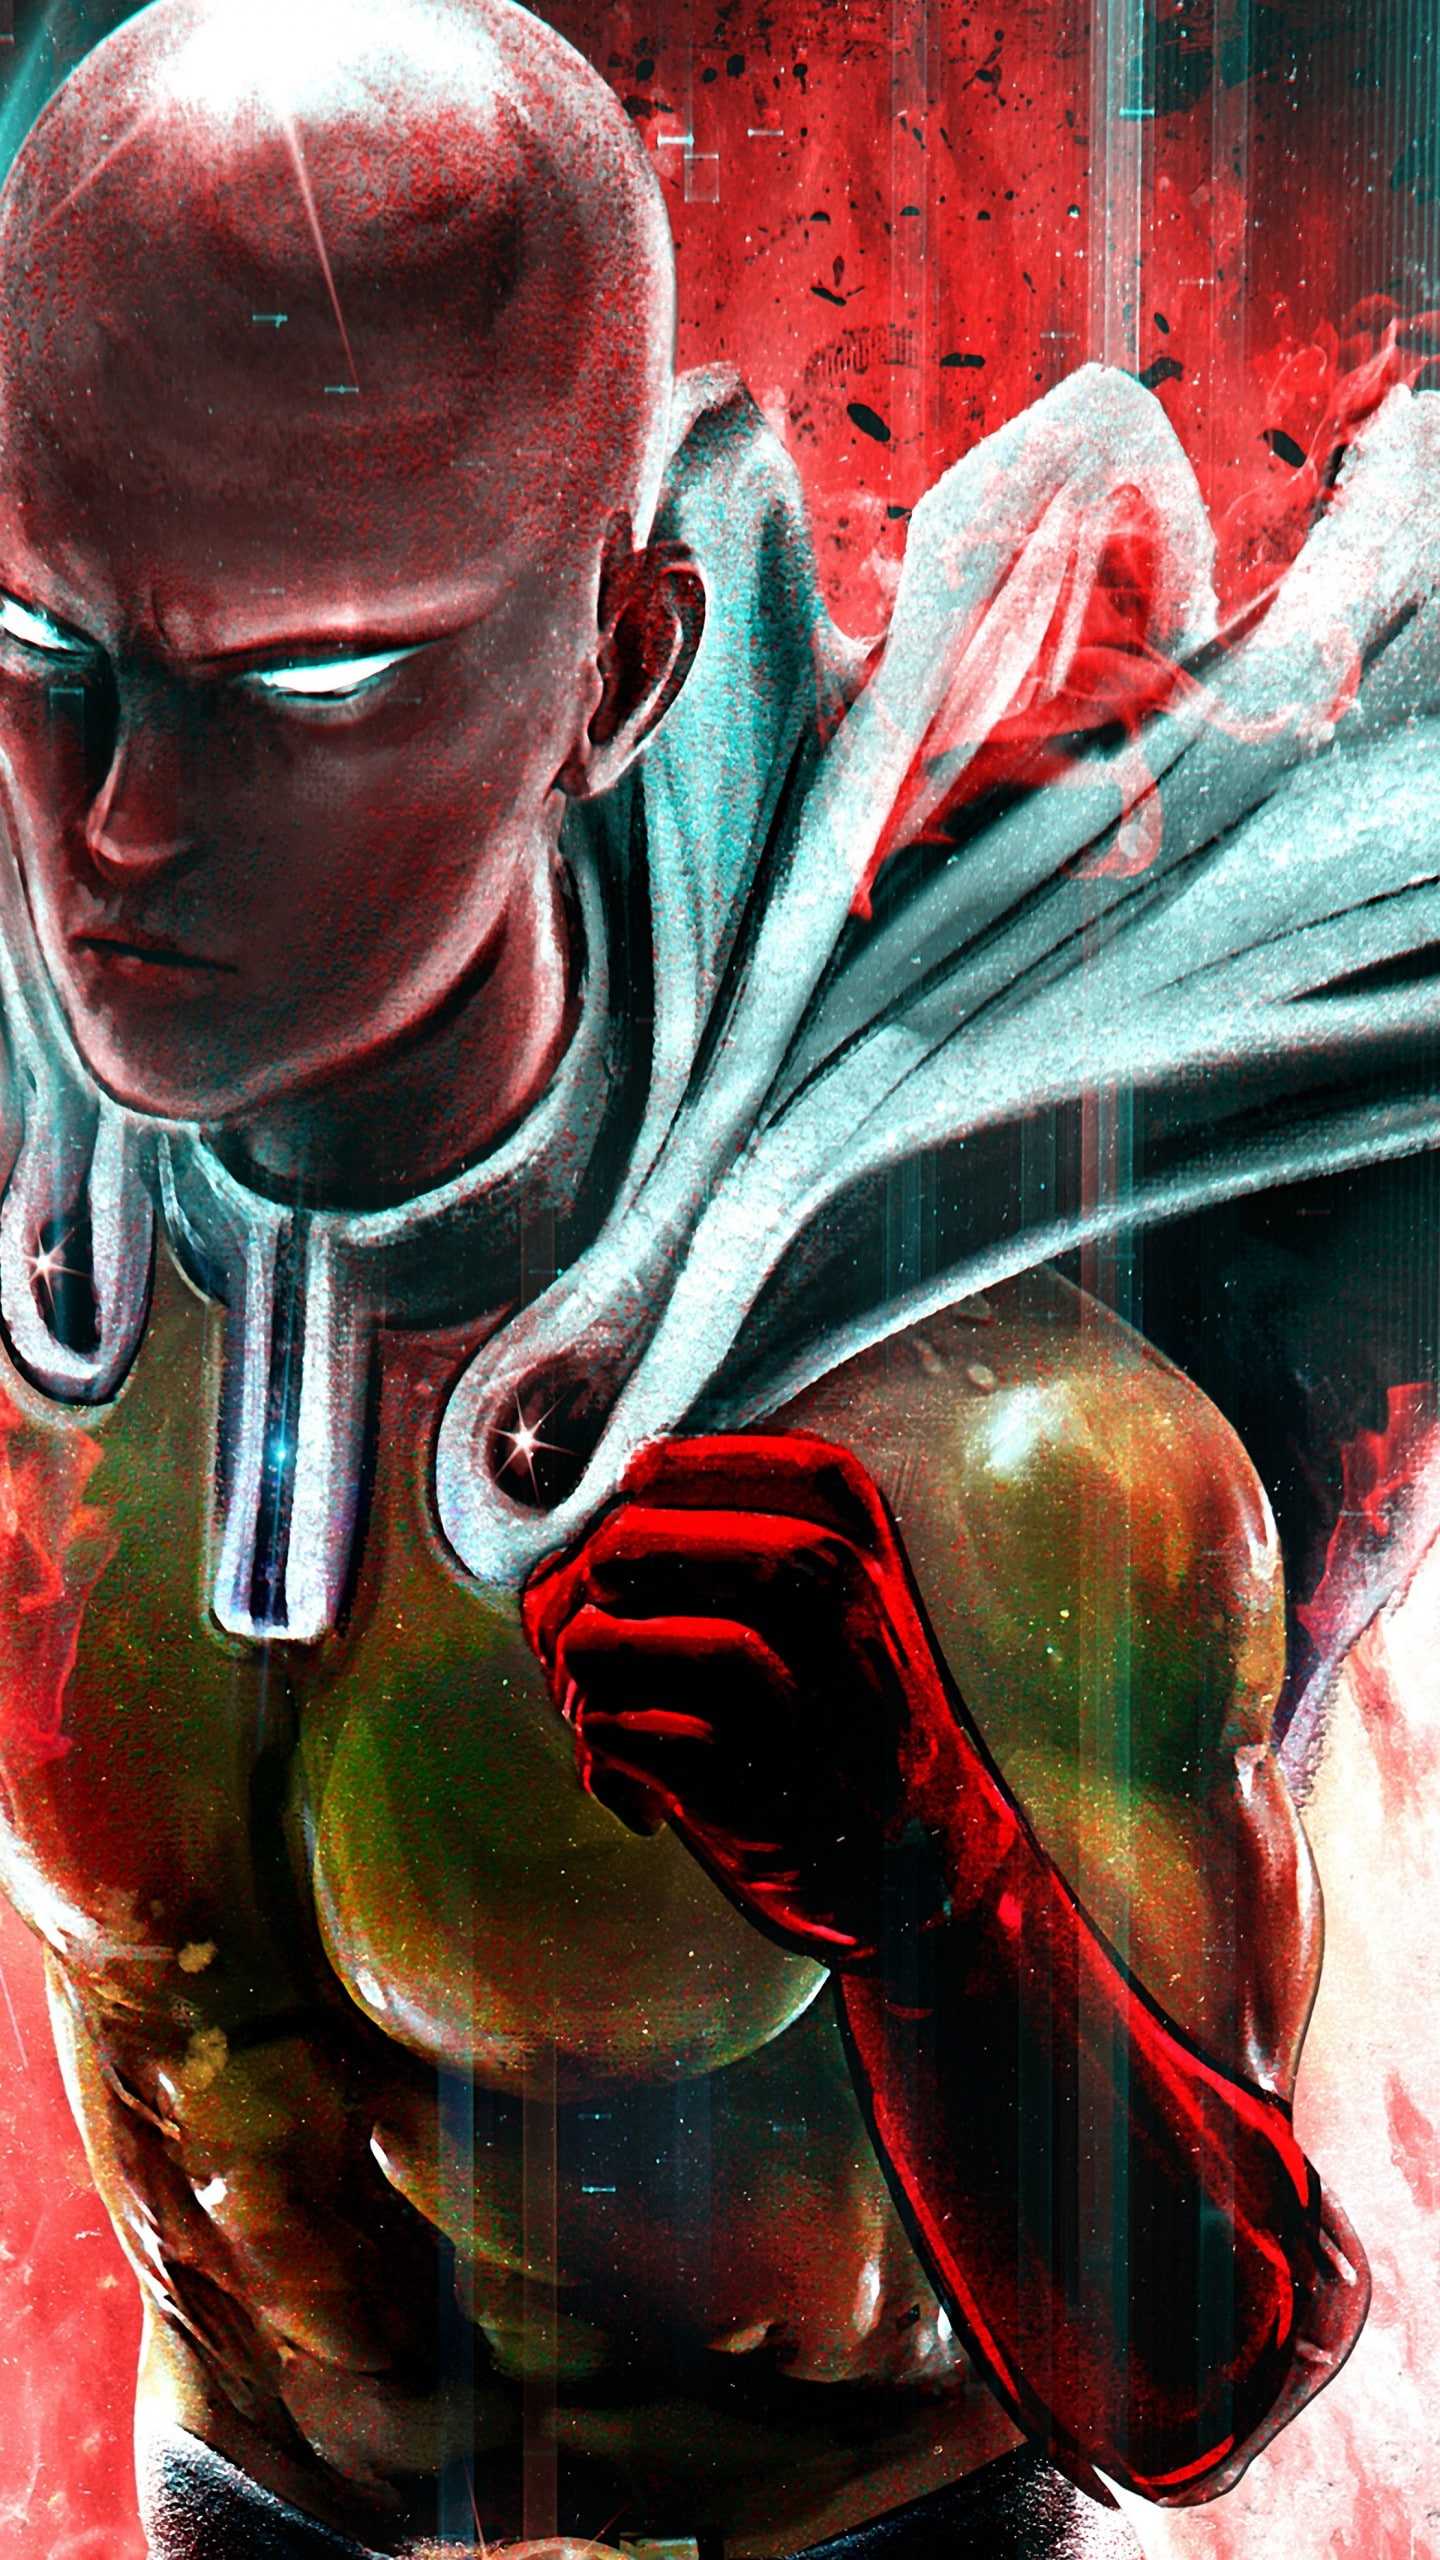 Download One Punch Man Wallpaper